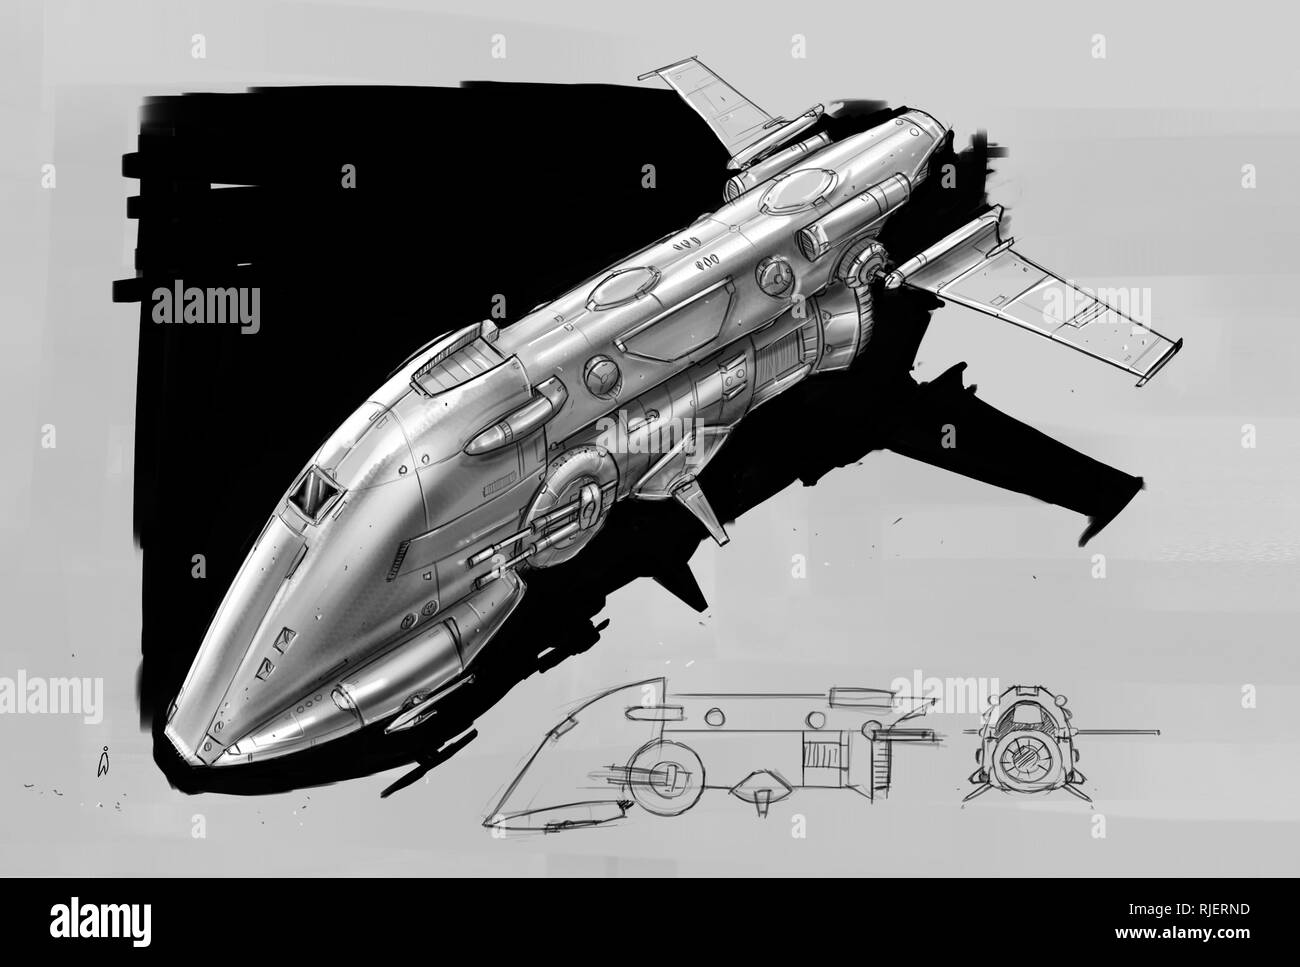 Digital Concept Art Drawing Of Space Ship Or Spaceship Stock Photo Alamy